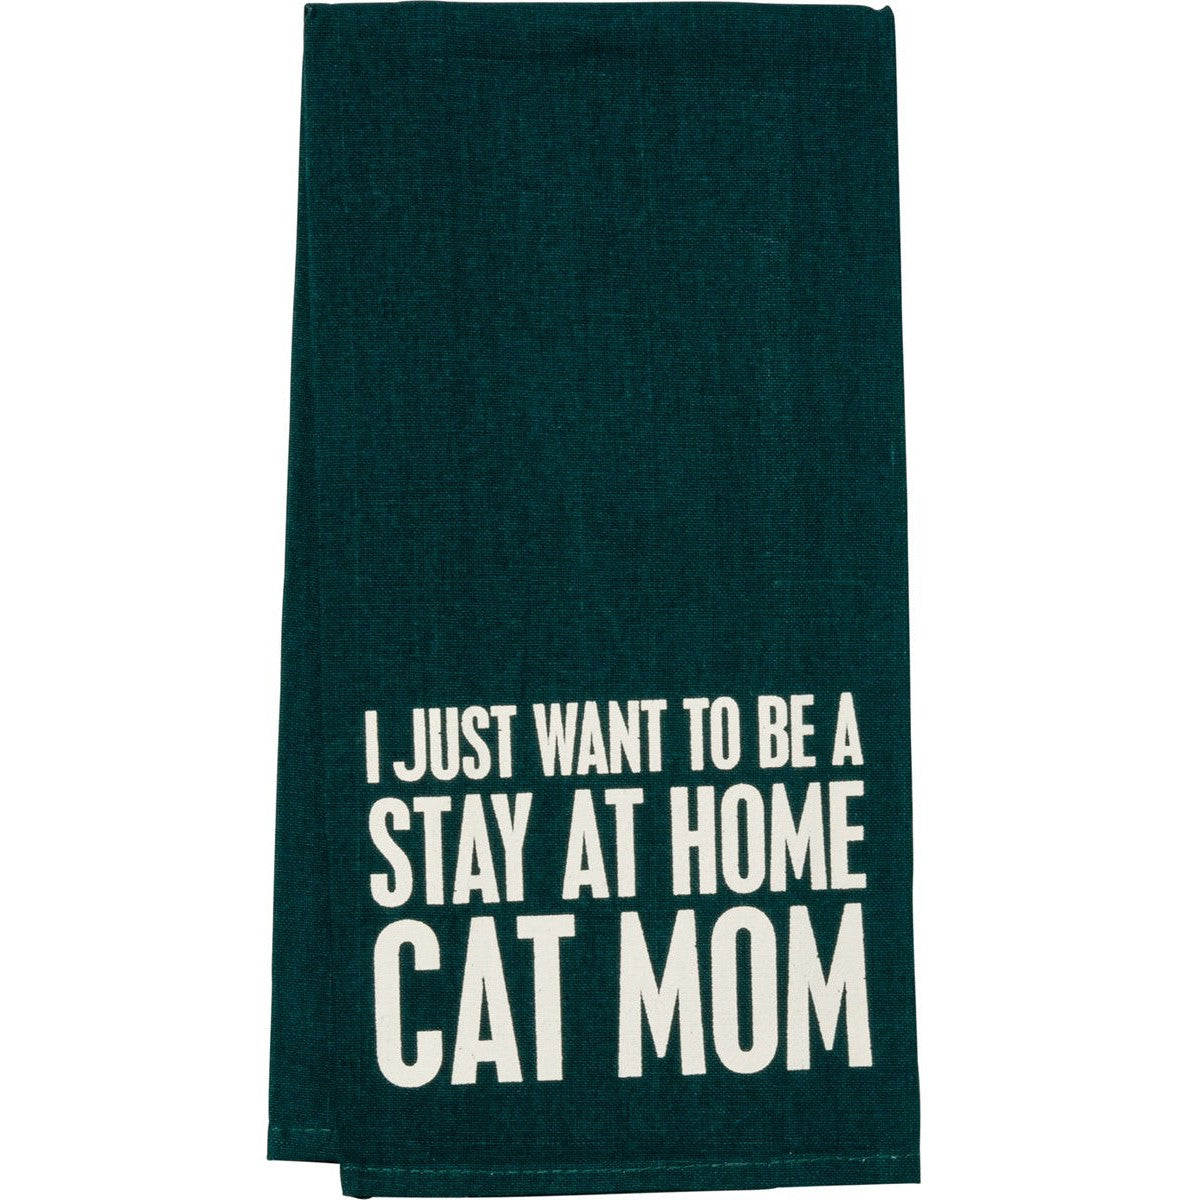 Stay At Home Cat Mom Dish Towel And Cat Shaped Cookie Cutter Set